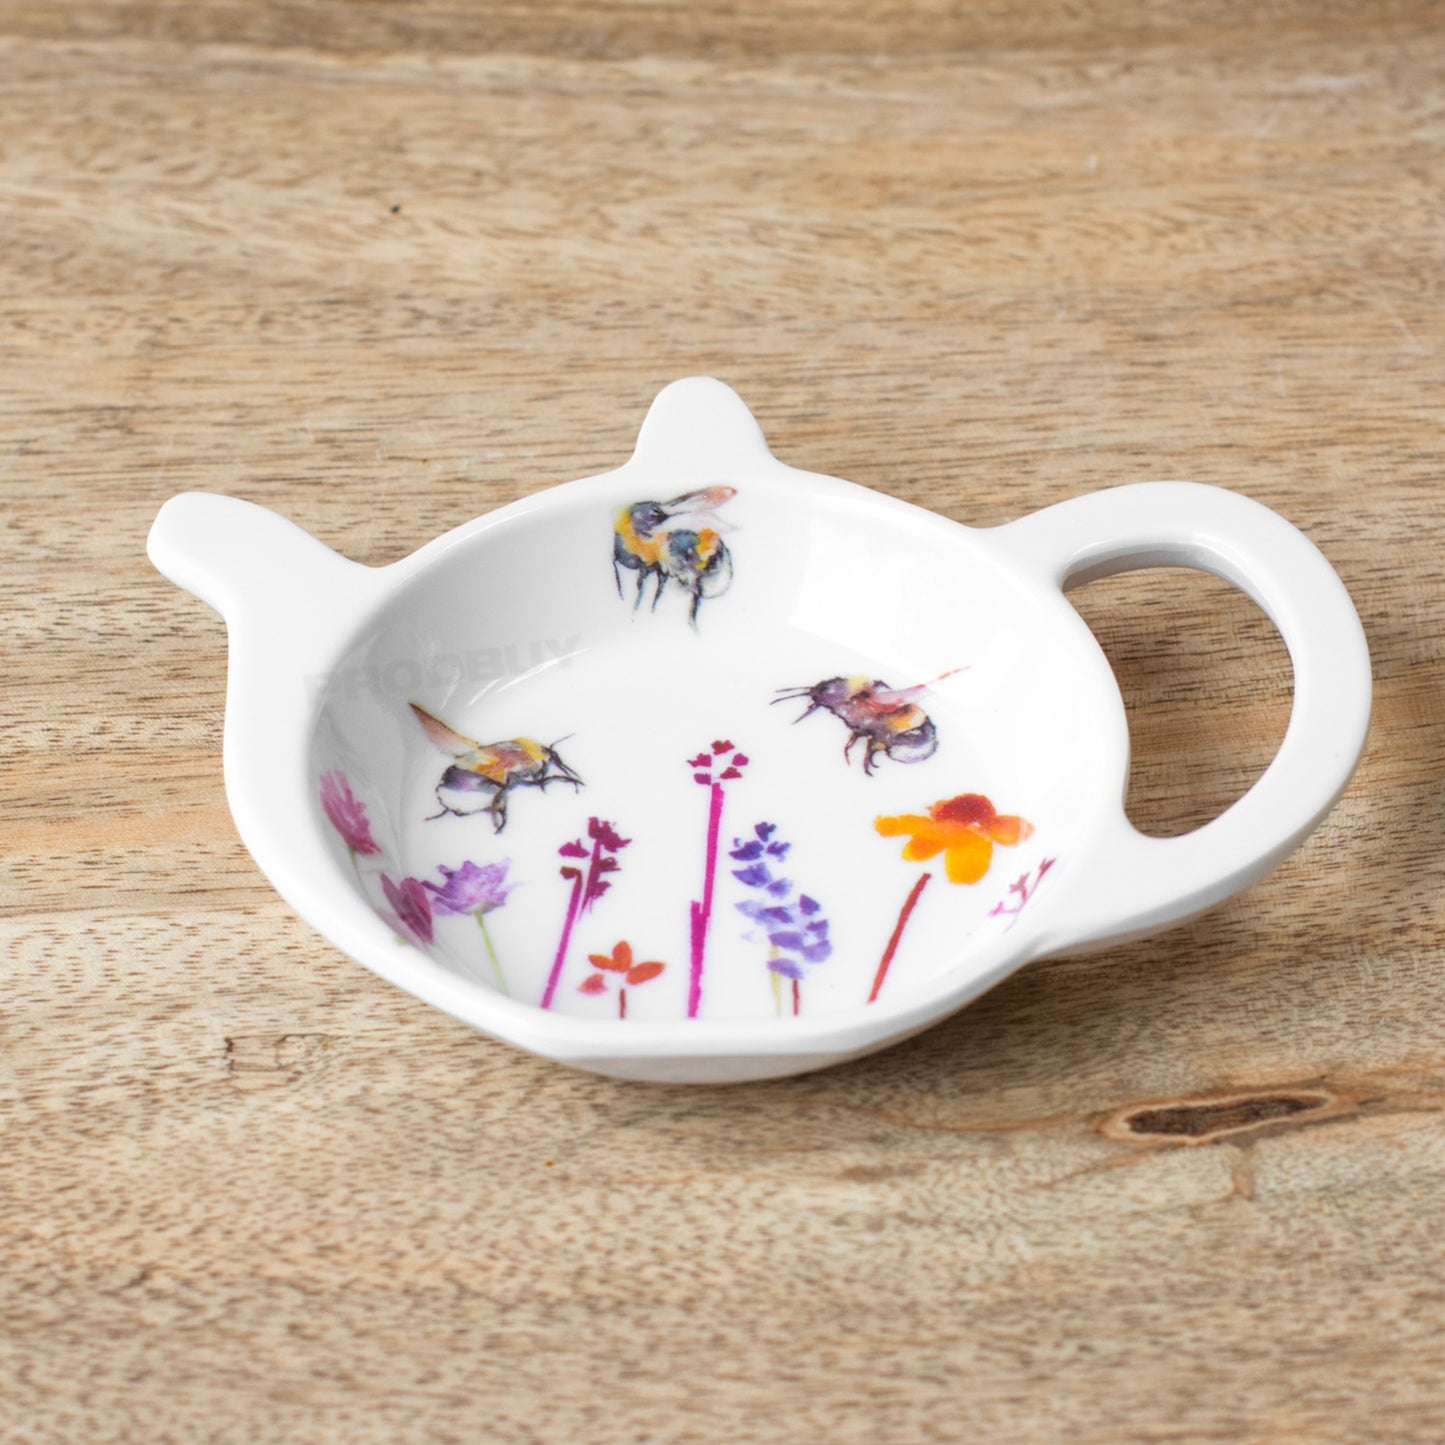 Floral 'Busy Bees' Tea Bag Tidy & Spoon Rest